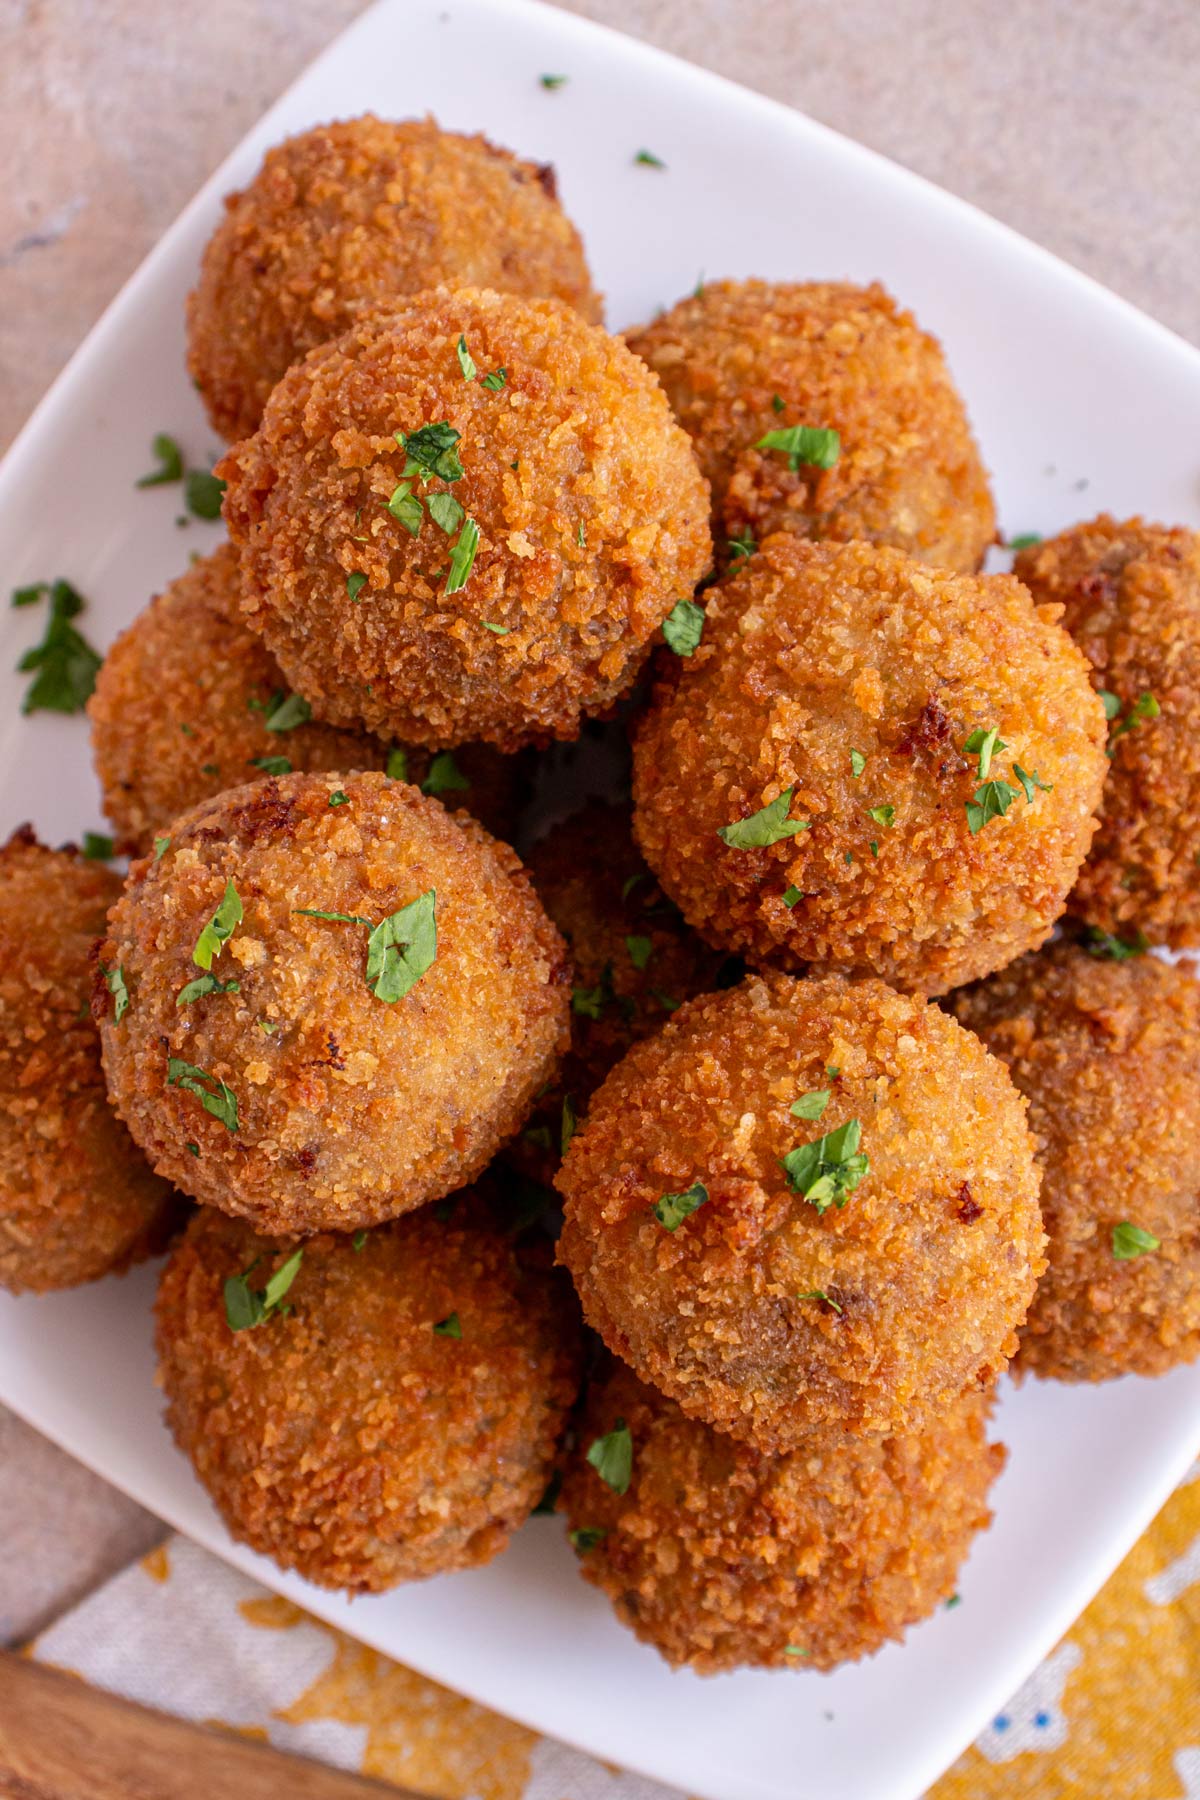 Closeup of fried bitterballen topped with chopped parsley piled high on a white plate.